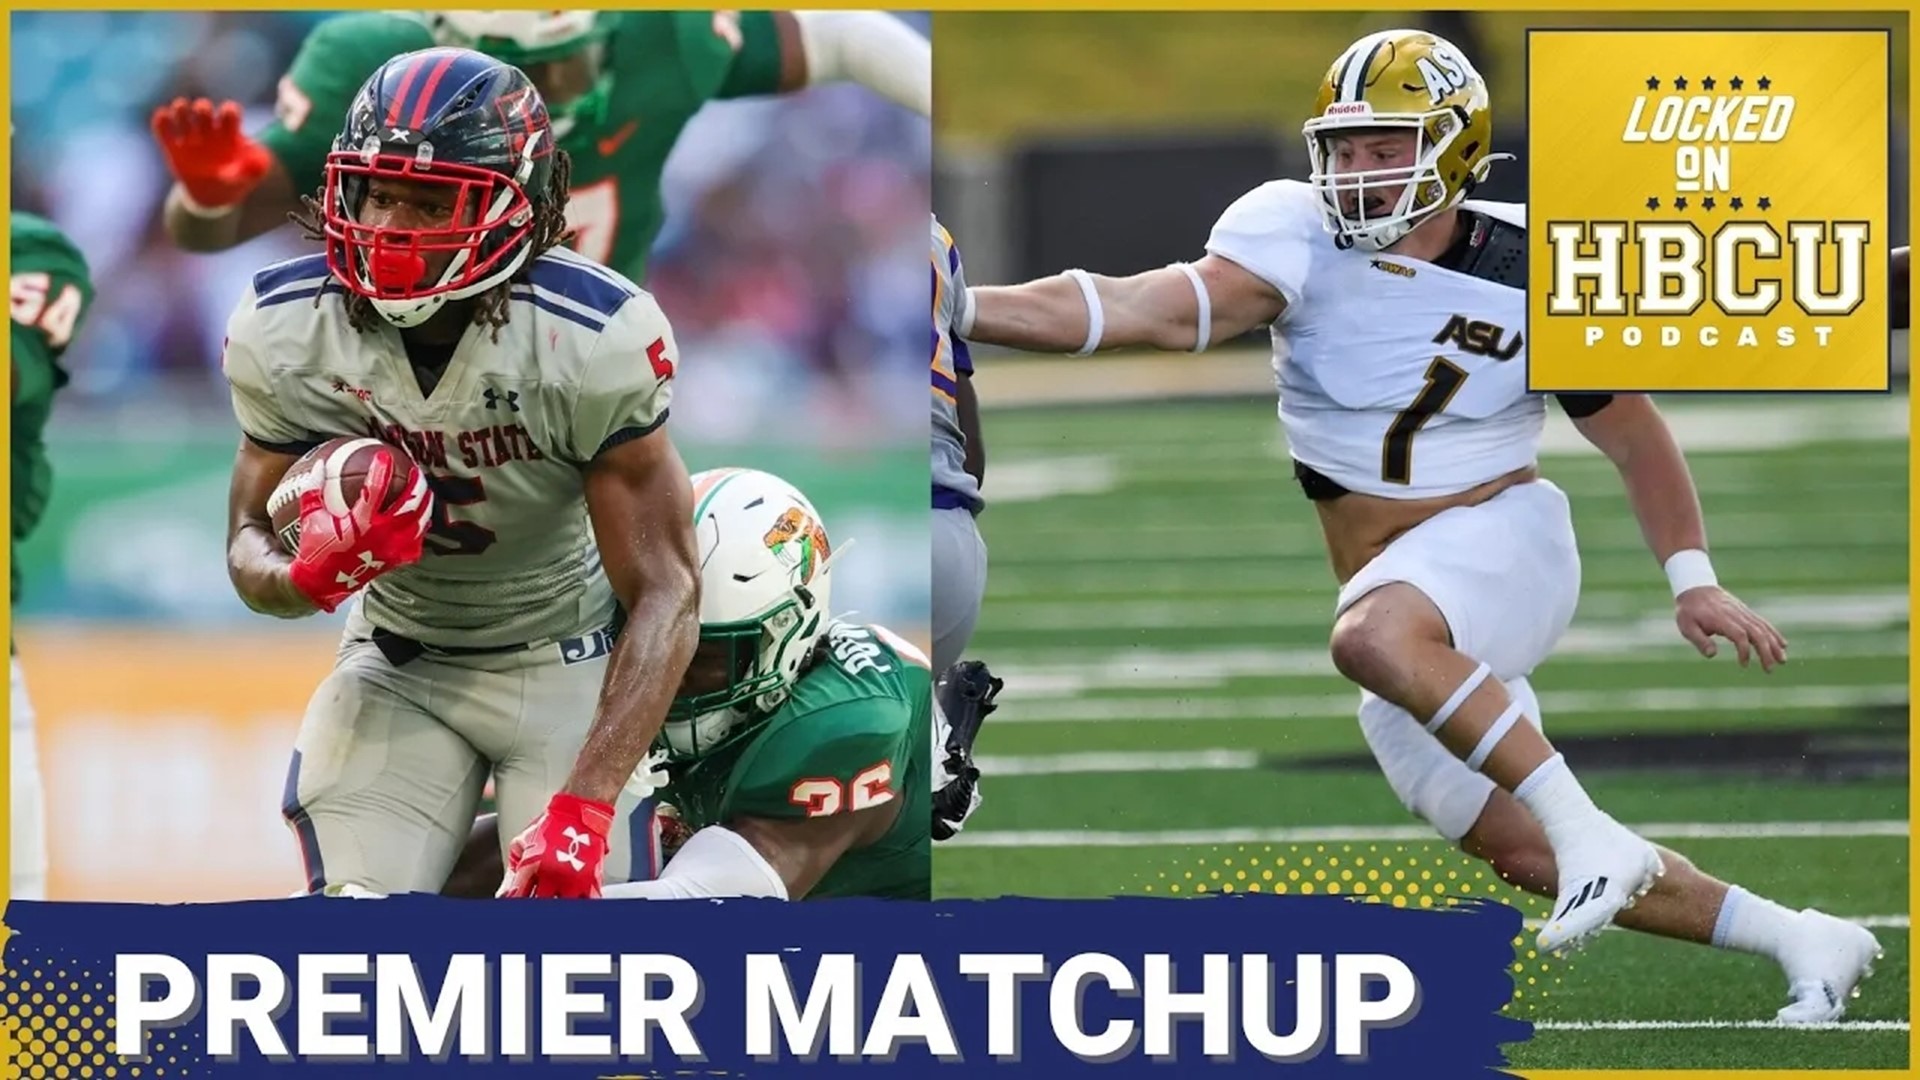 Irv Mulligan vs Colton Adams is the premiere matchup when Jackson State & Alabama State face off.